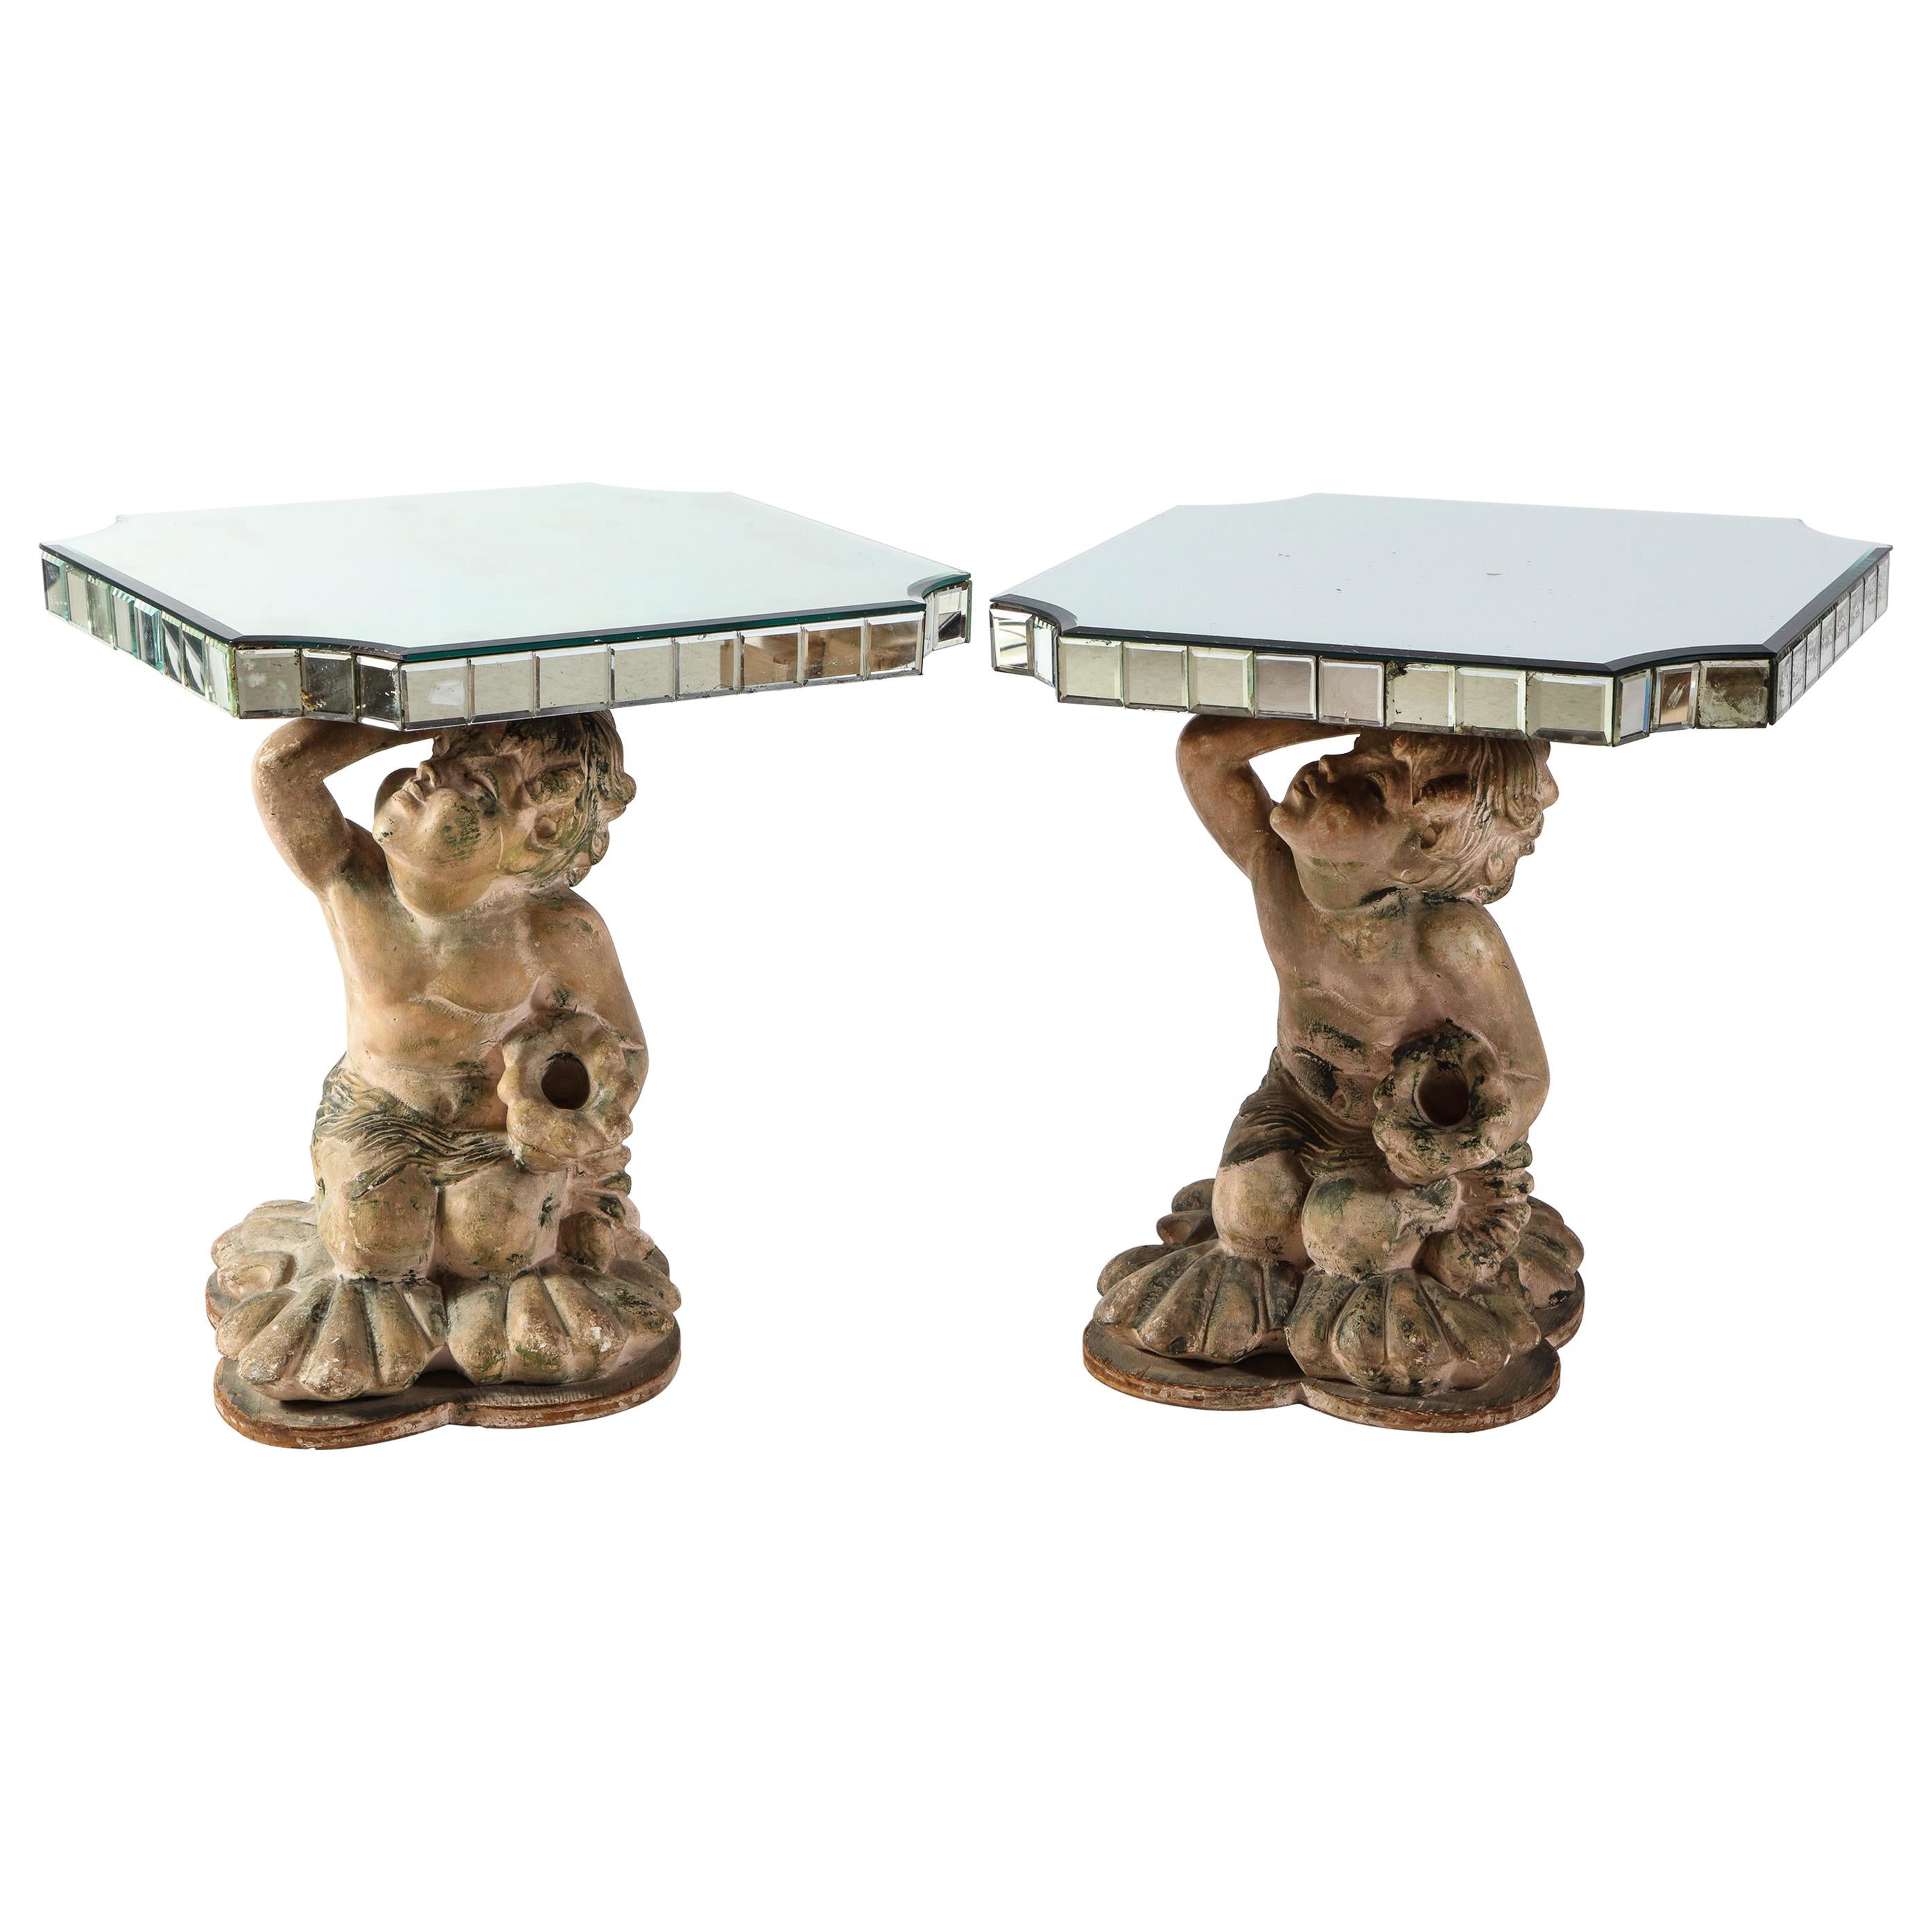 Pair of Midcentury French Terracotta Mirrored and Figural Side Tables